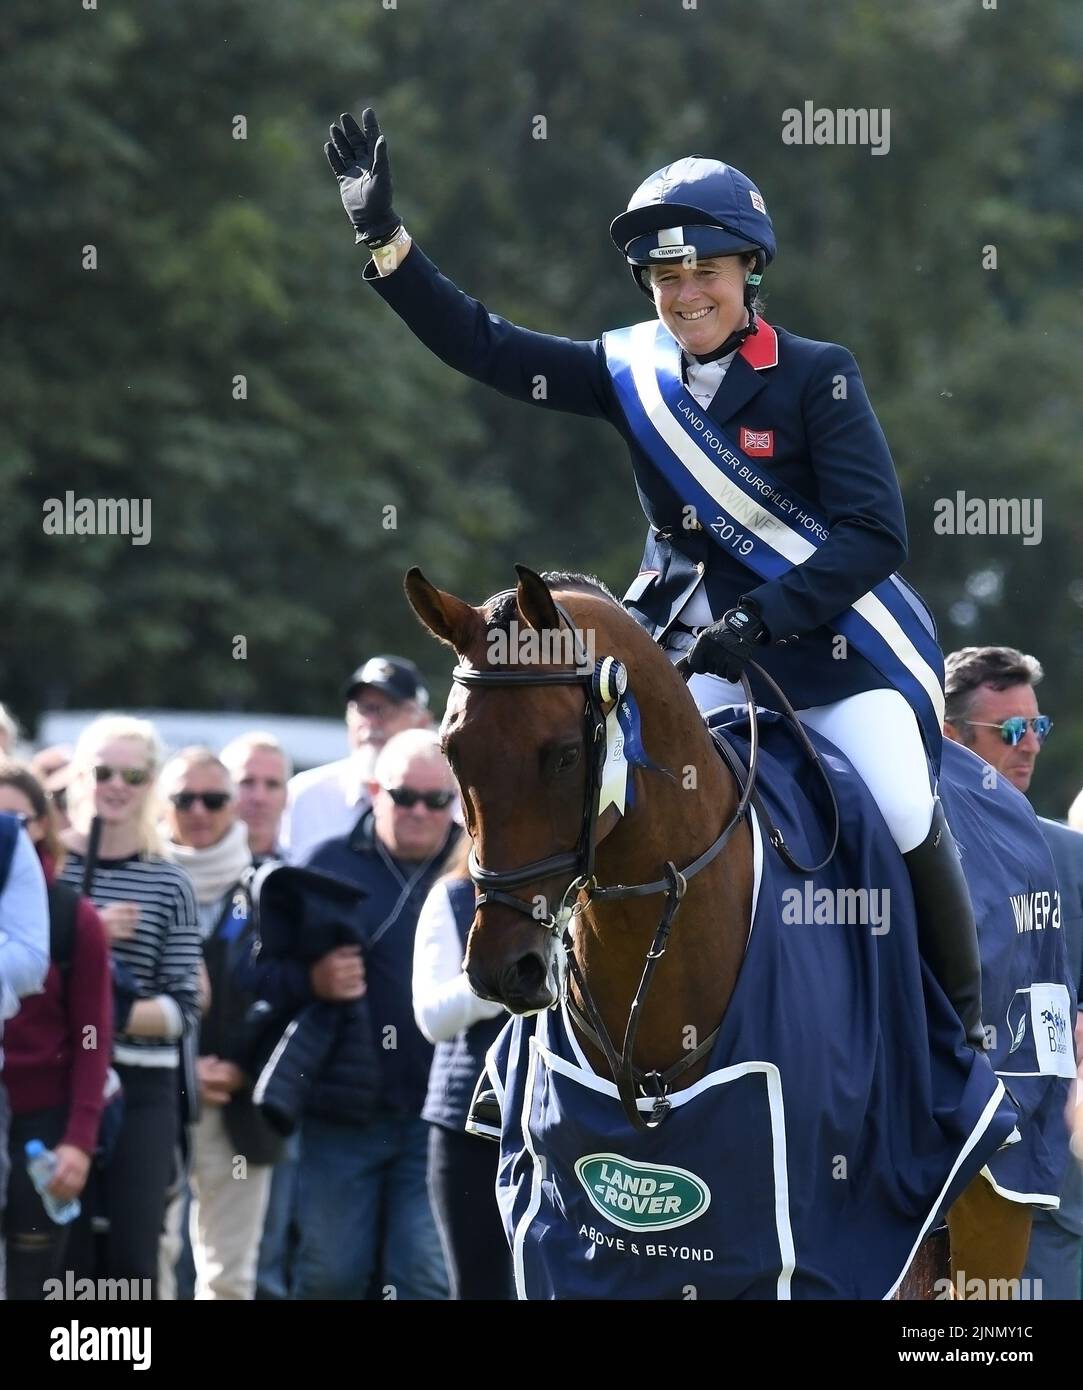 Burghley H/T 08.09.19 Pippa Funnell Foto de stock